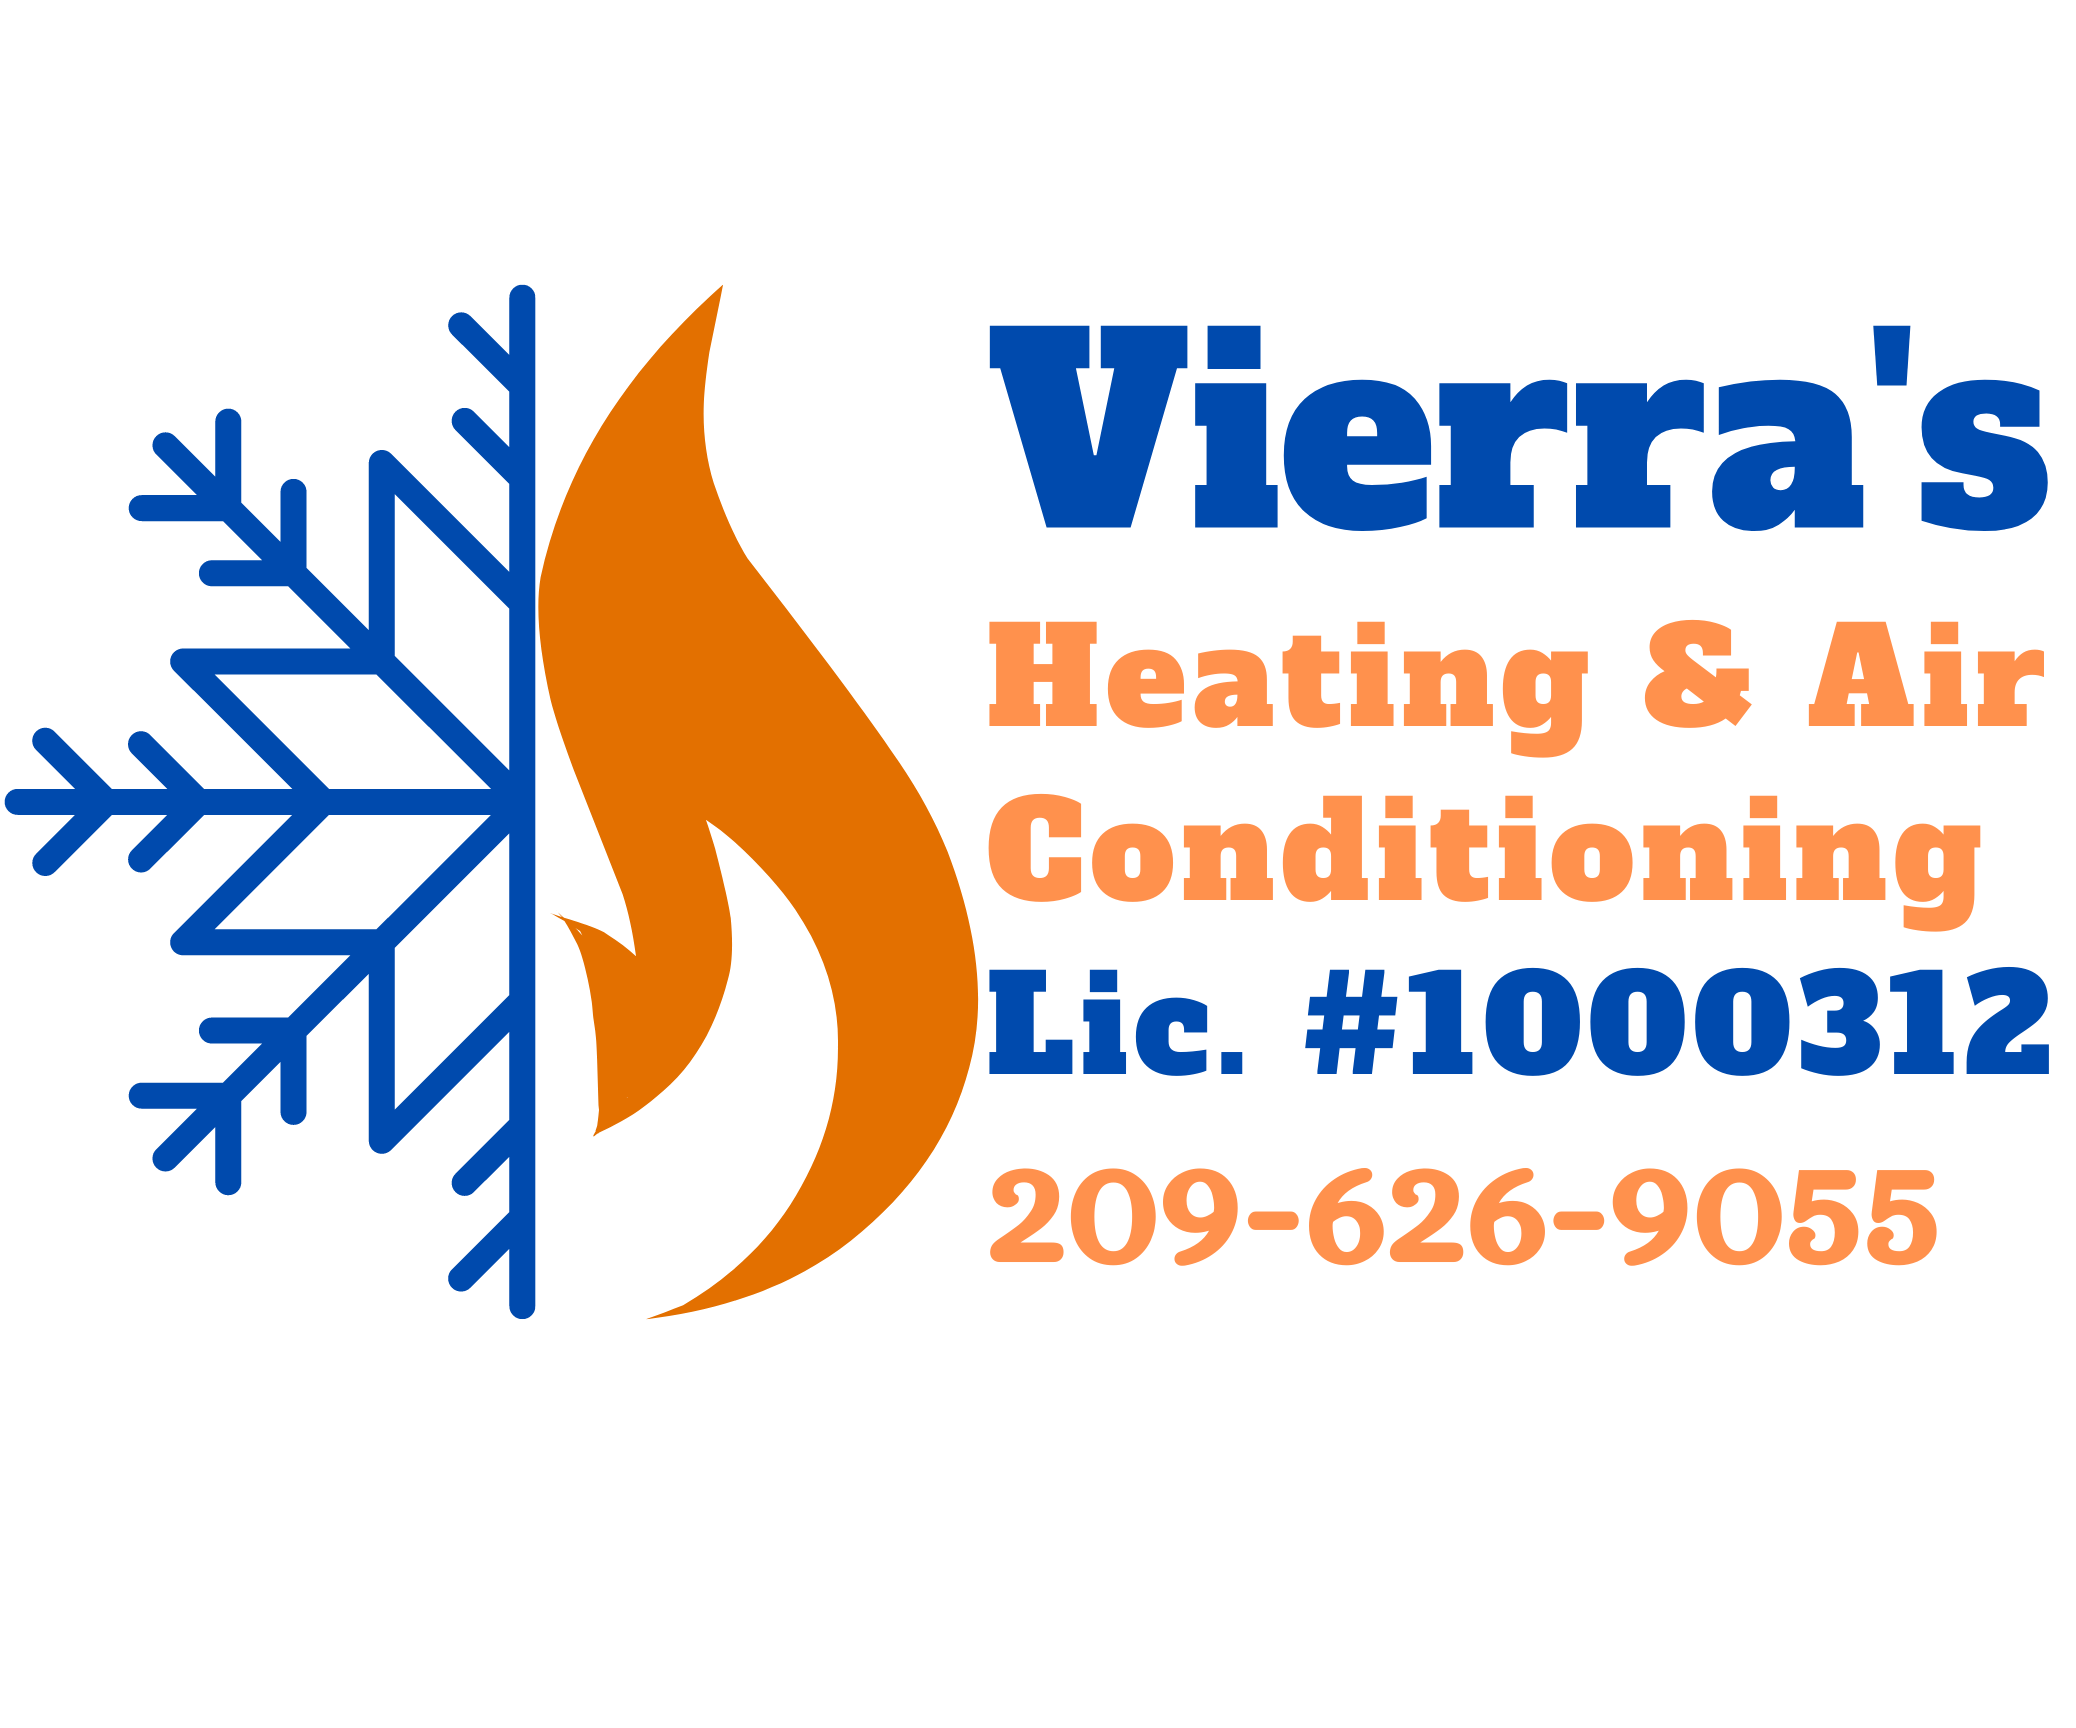 Vierra's Heating & Air Conditioning